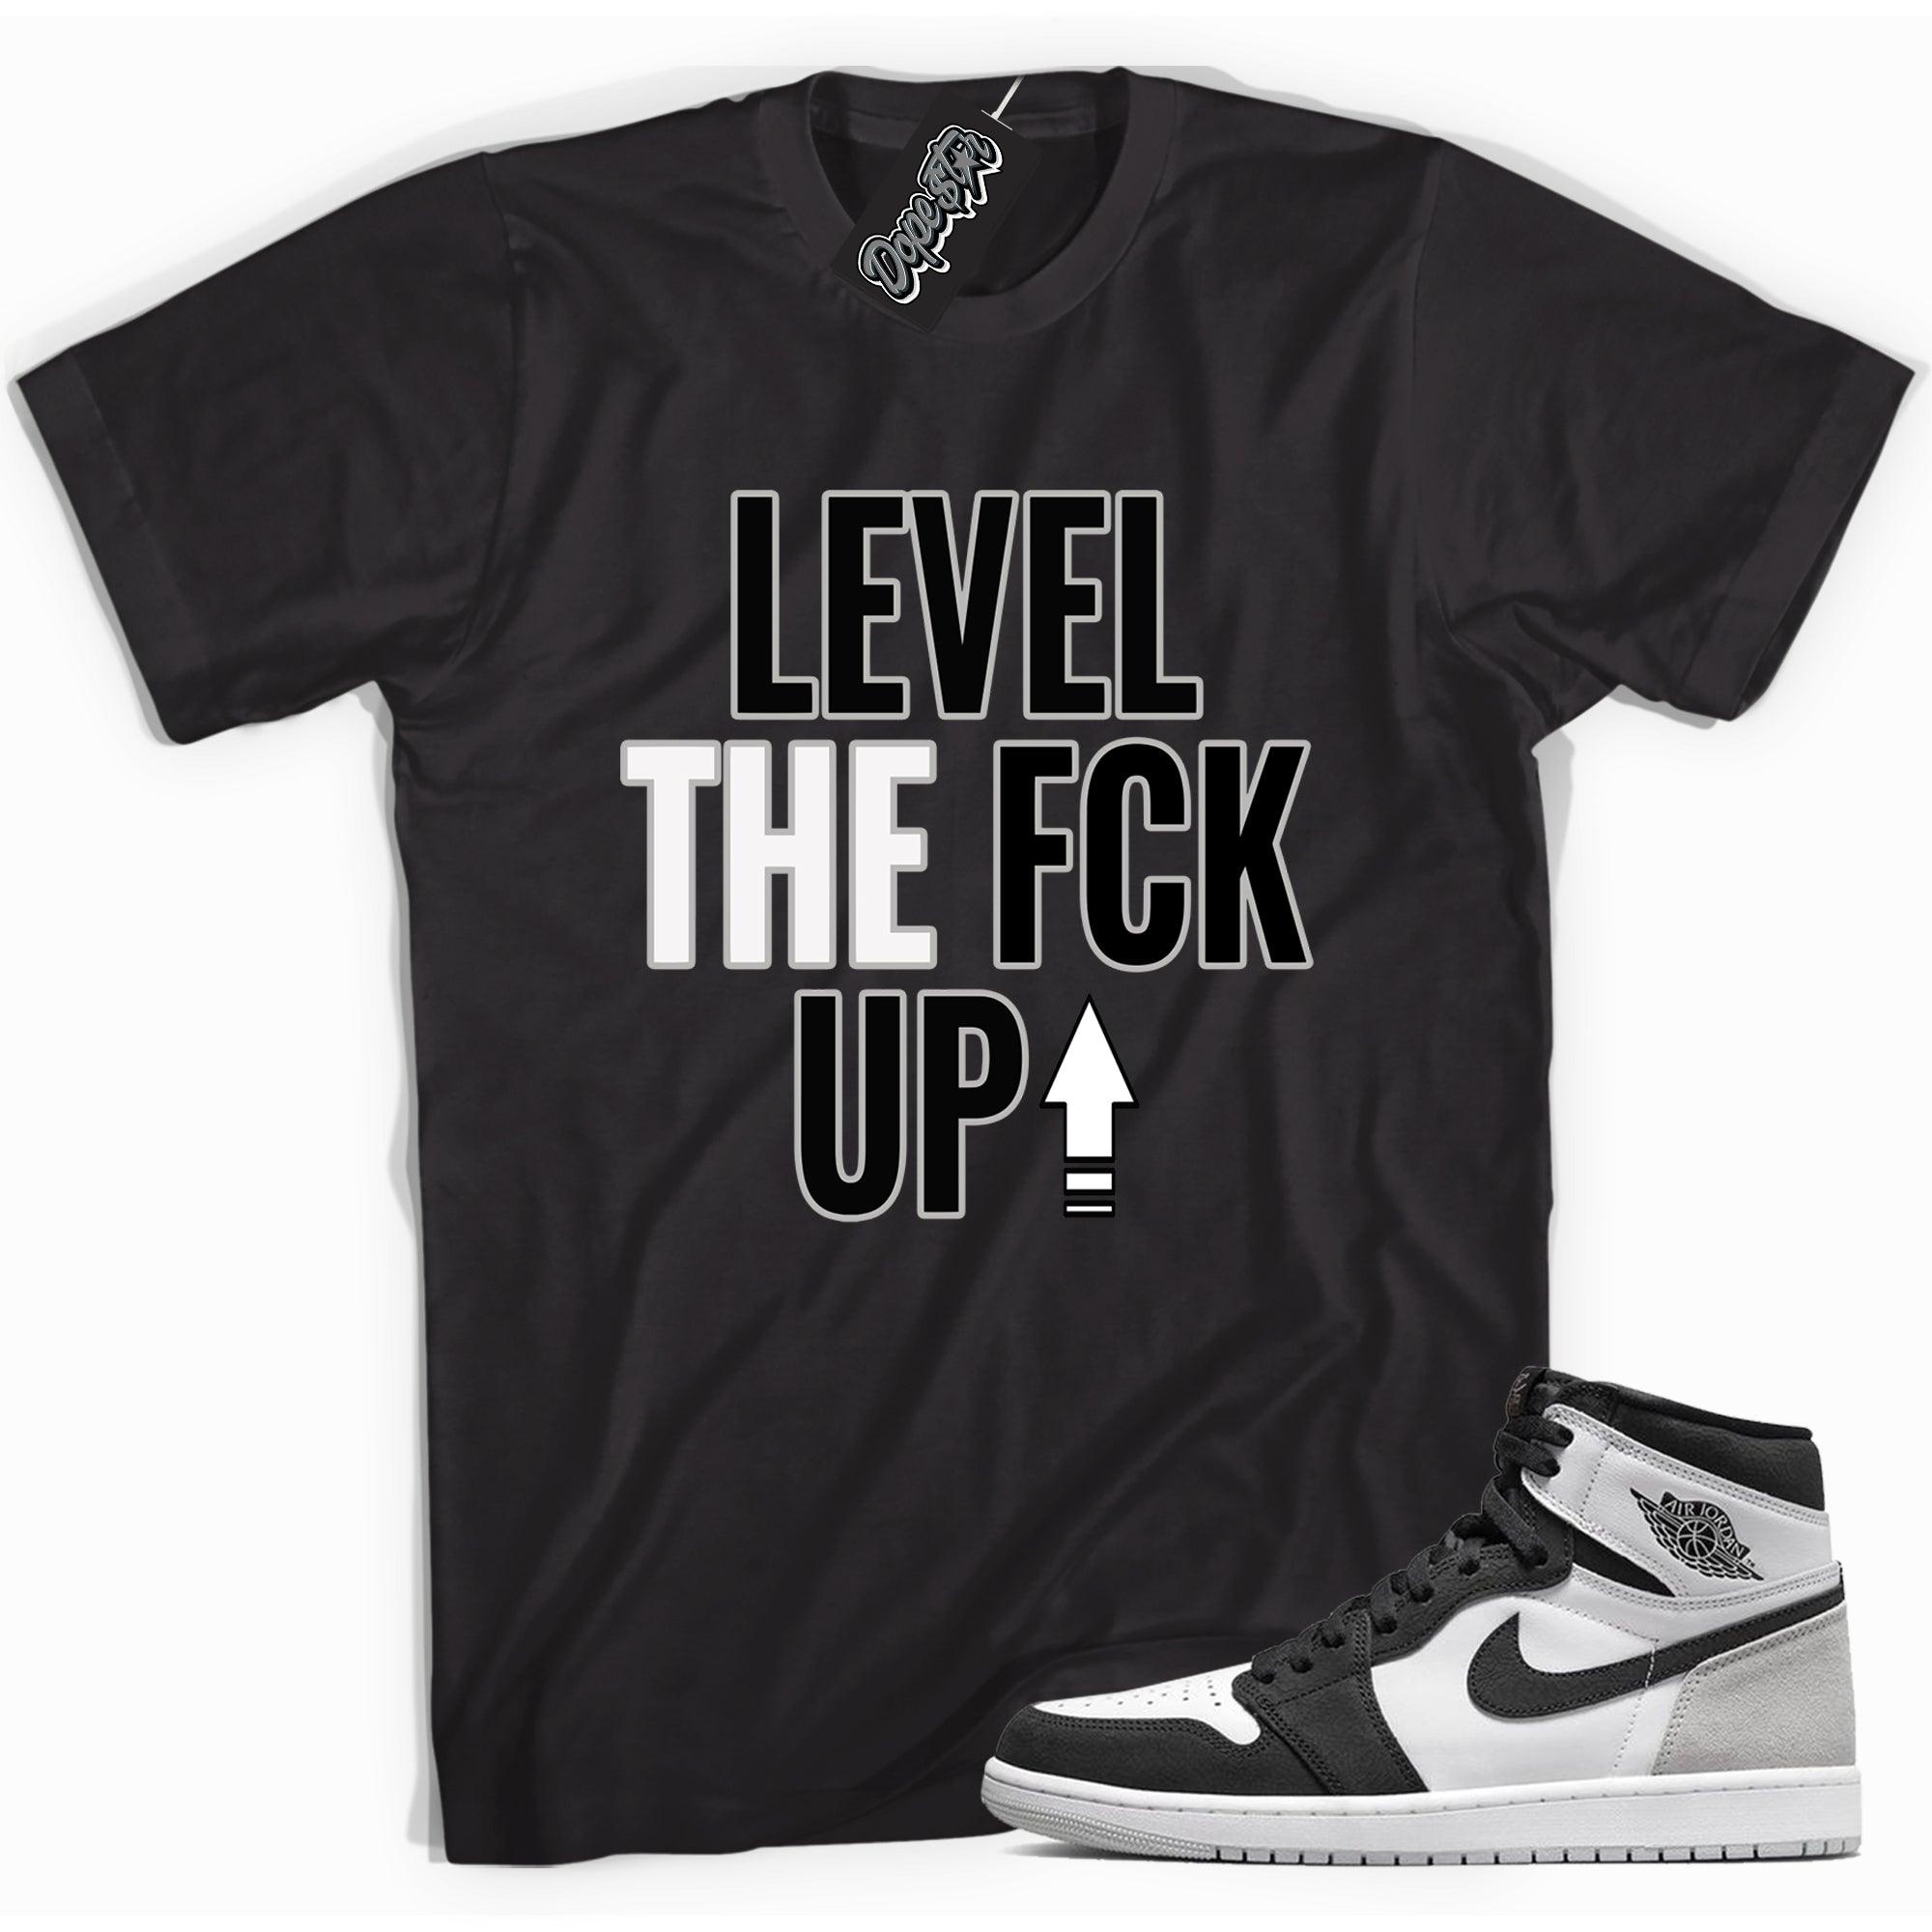 Cool black graphic tee with 'Level Up' print, that perfectly matches Air Jordan 1 Retro High OG Stage Haze sneakers.